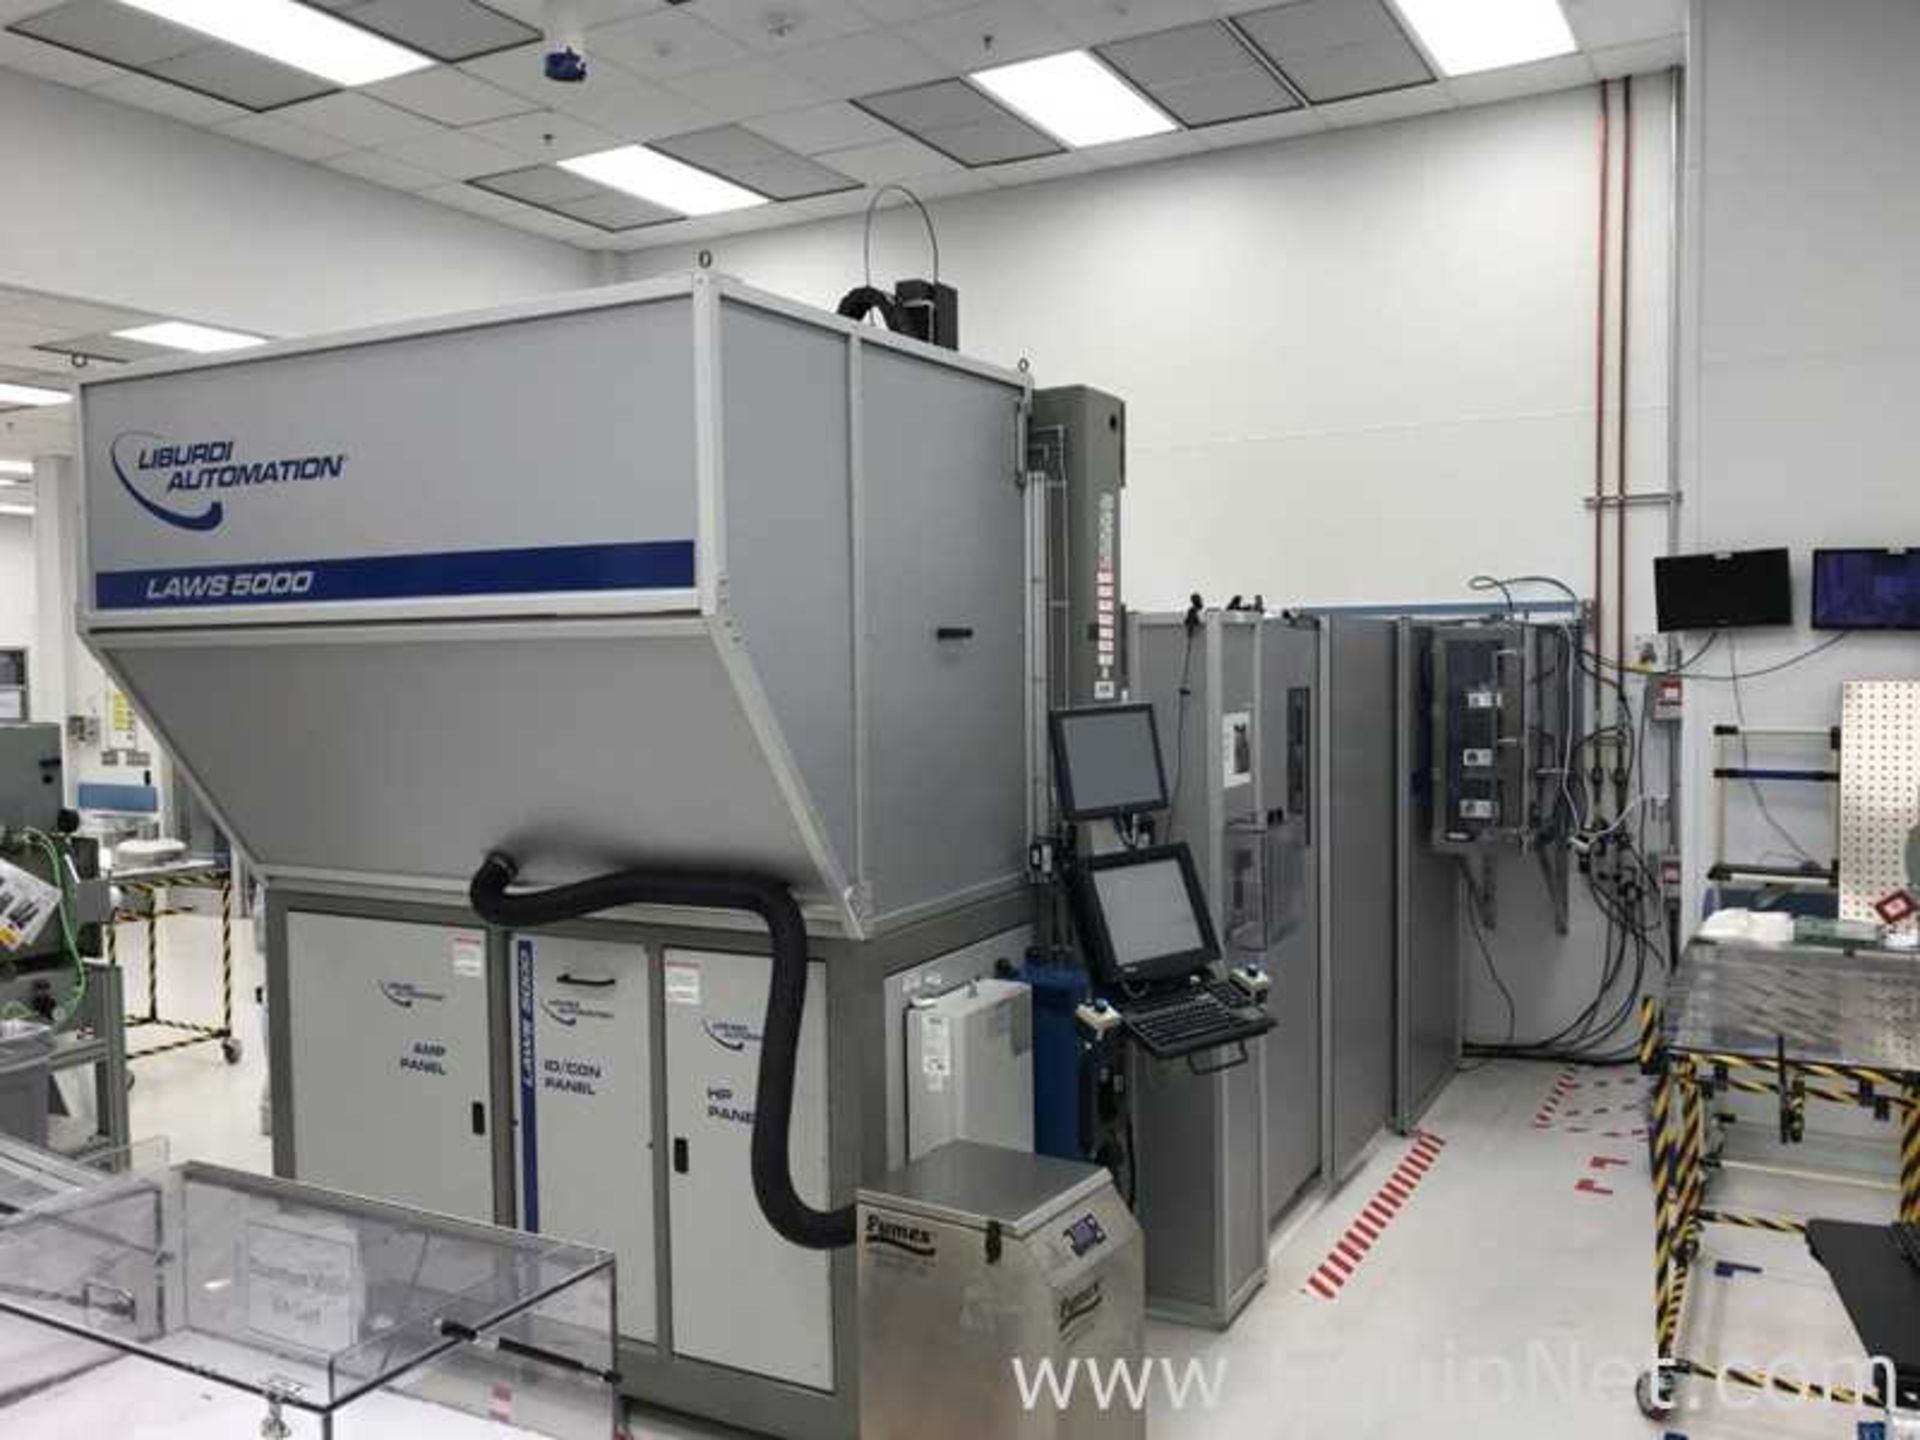 Liburdi Automation Laws 5000 Multi Axis Tig Welding Cell with 4 Yaskawa Robotic Positioners - Image 5 of 13